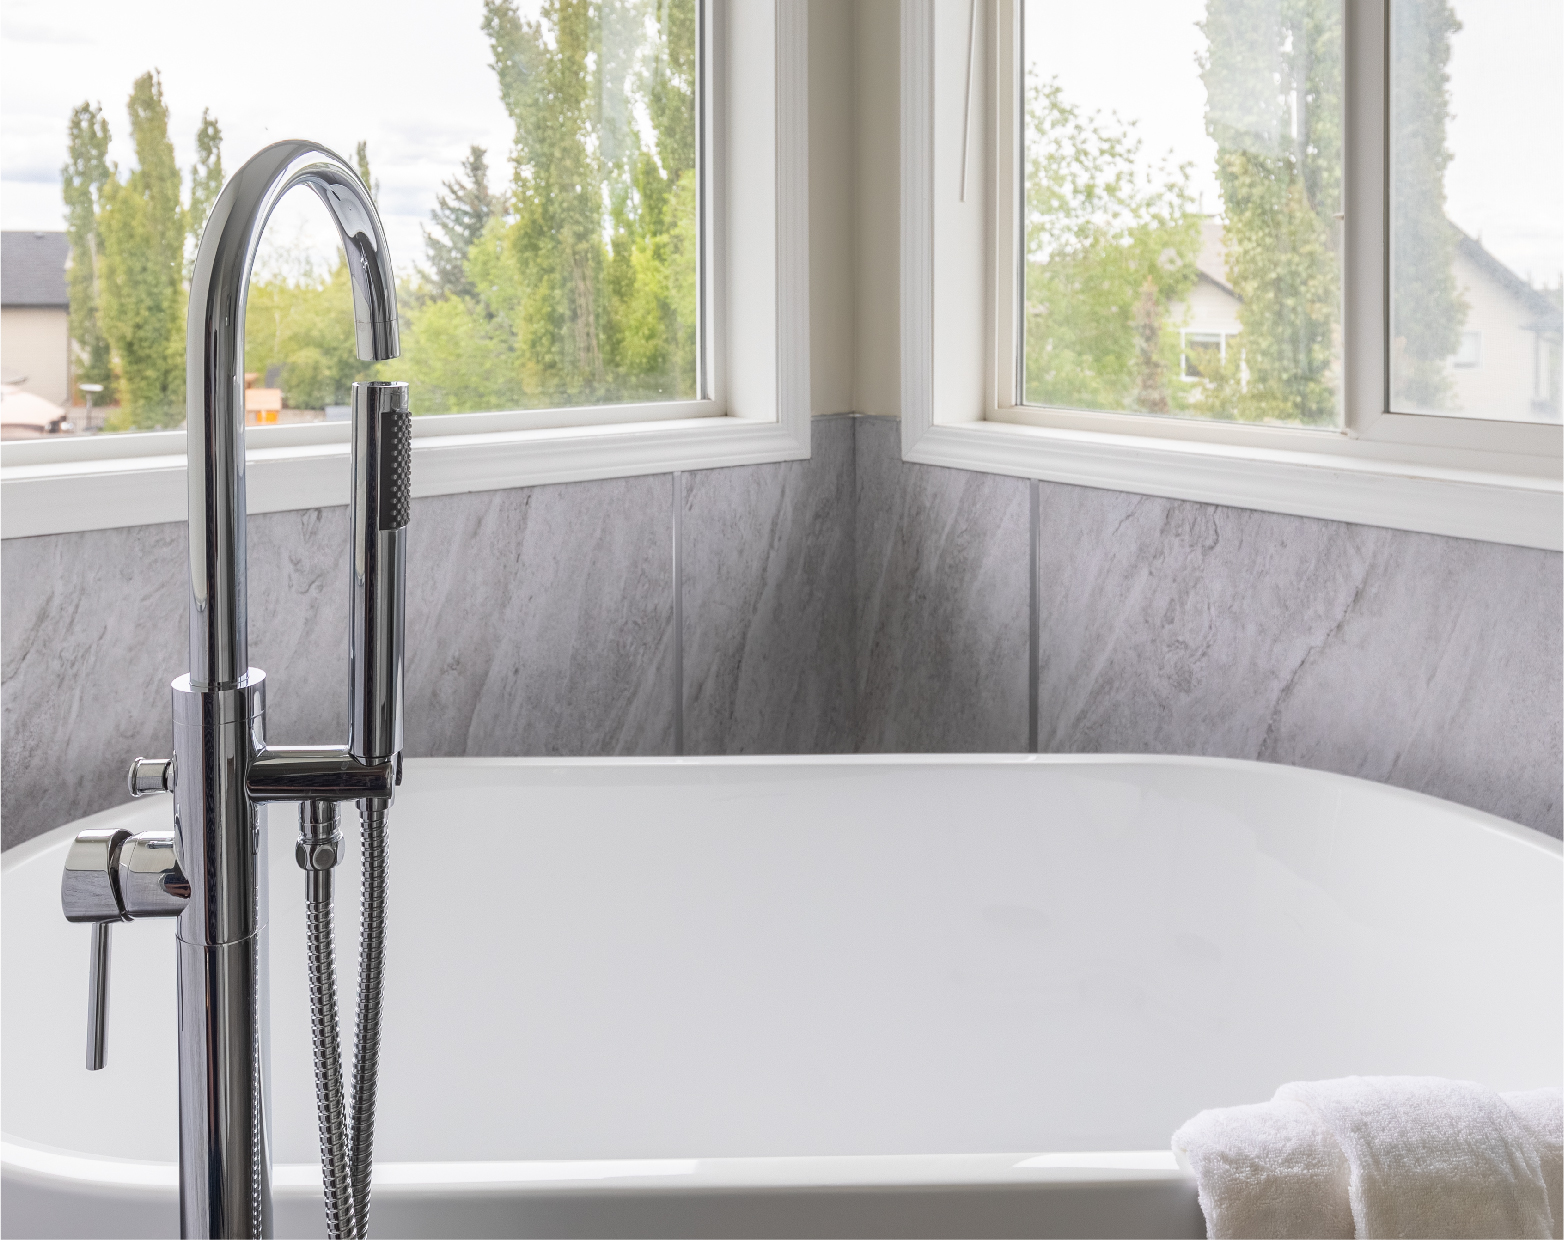 Top Reasons Homeowners Opt for a Bathroom Remodel